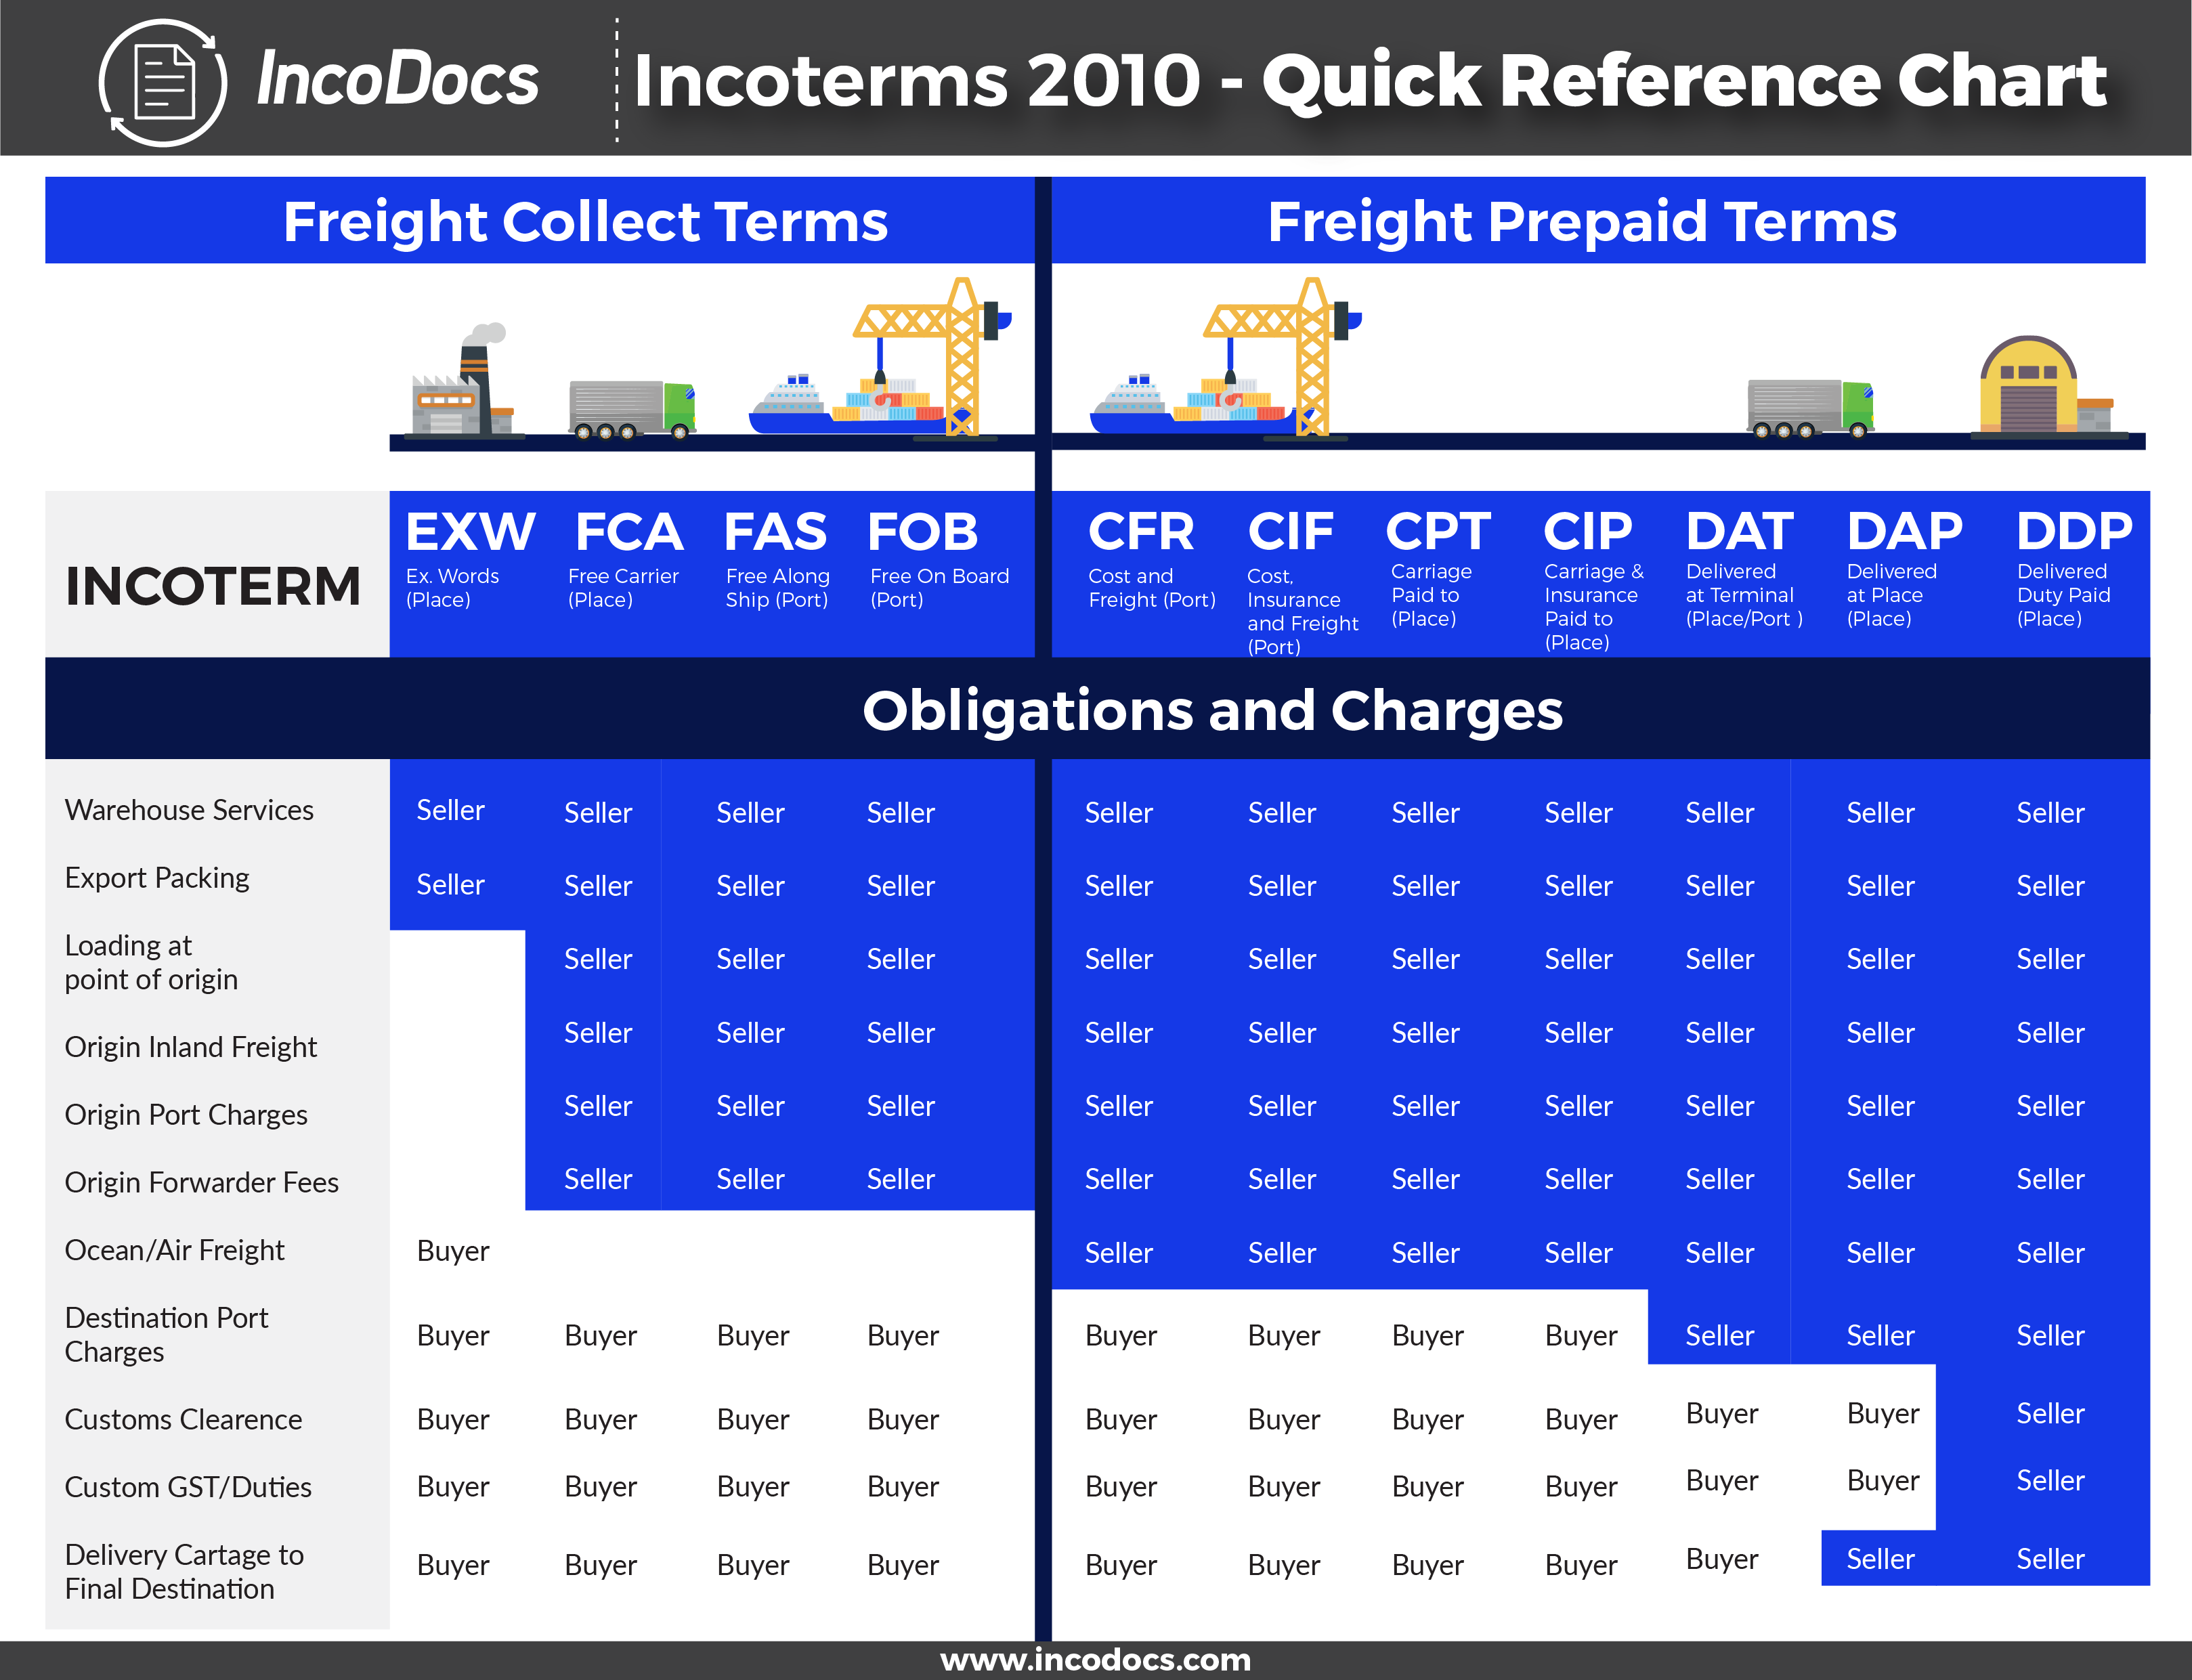 Incoterms® Explained The Complete Guide Incodocs 4949